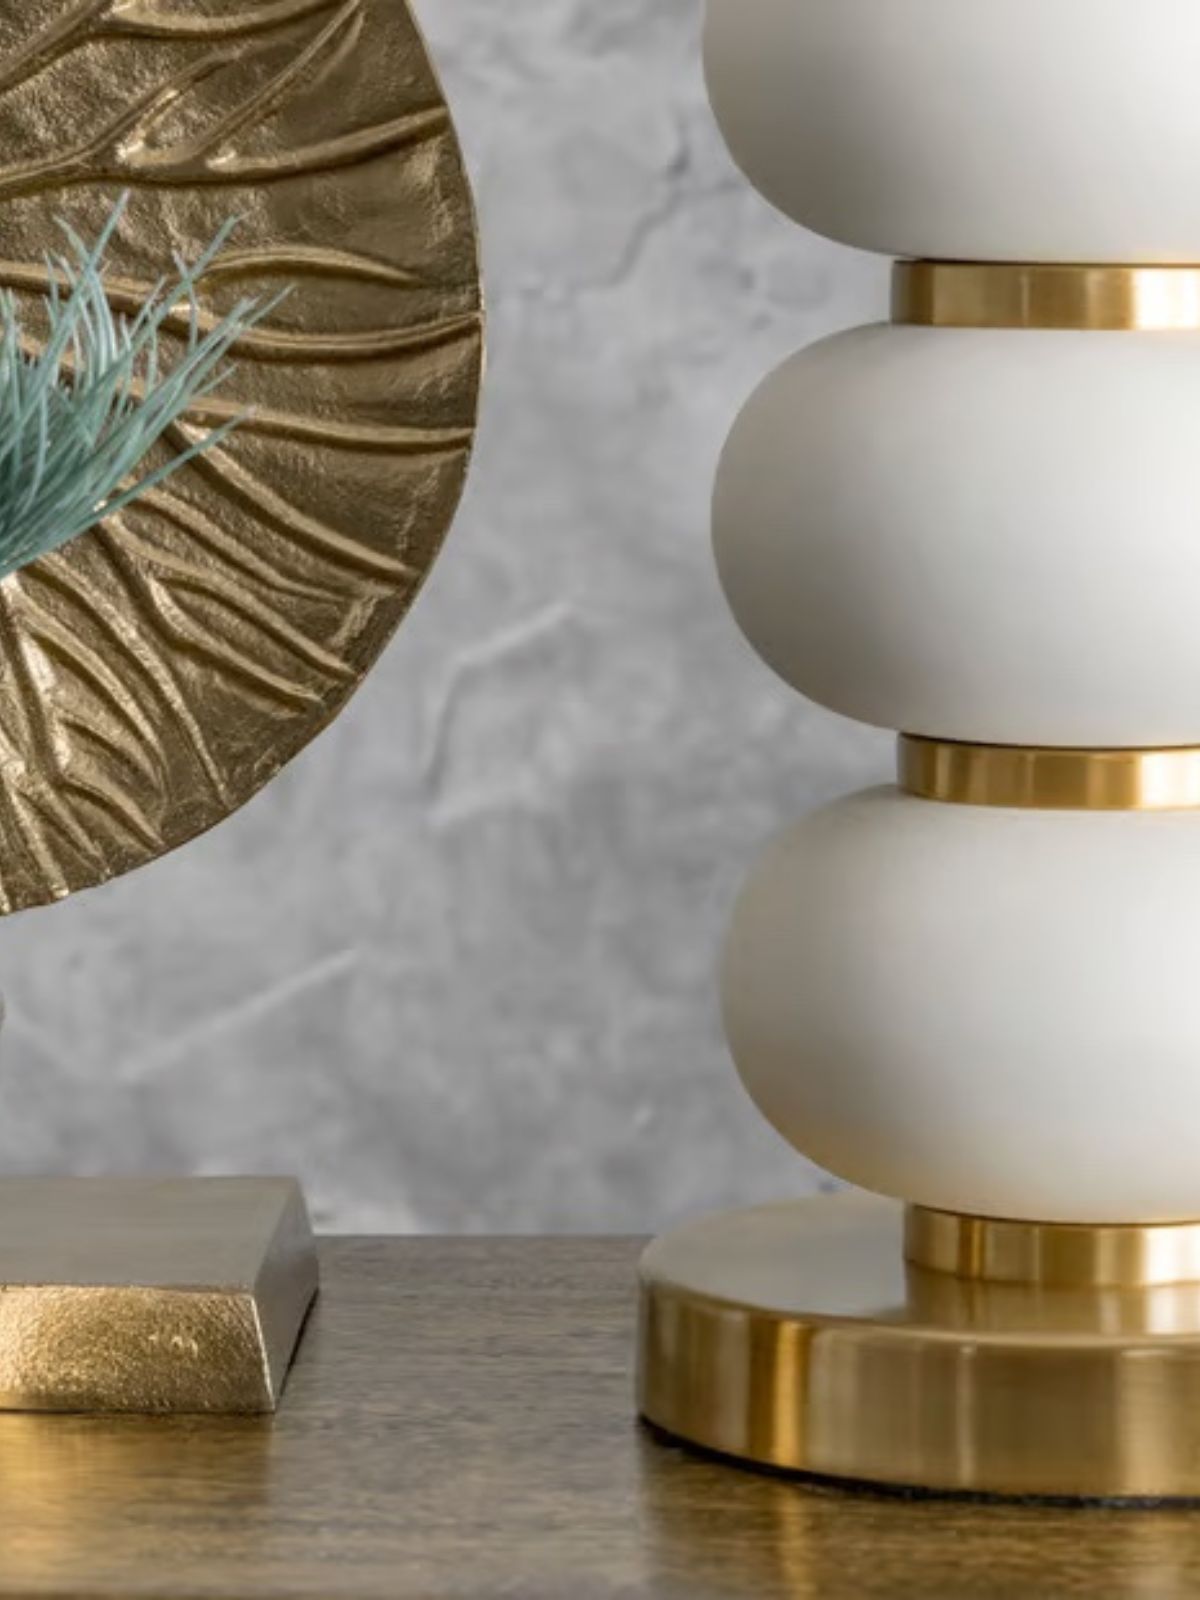 Gold Metal Table Lamp with White Oval Bead Design Staged on Desk.